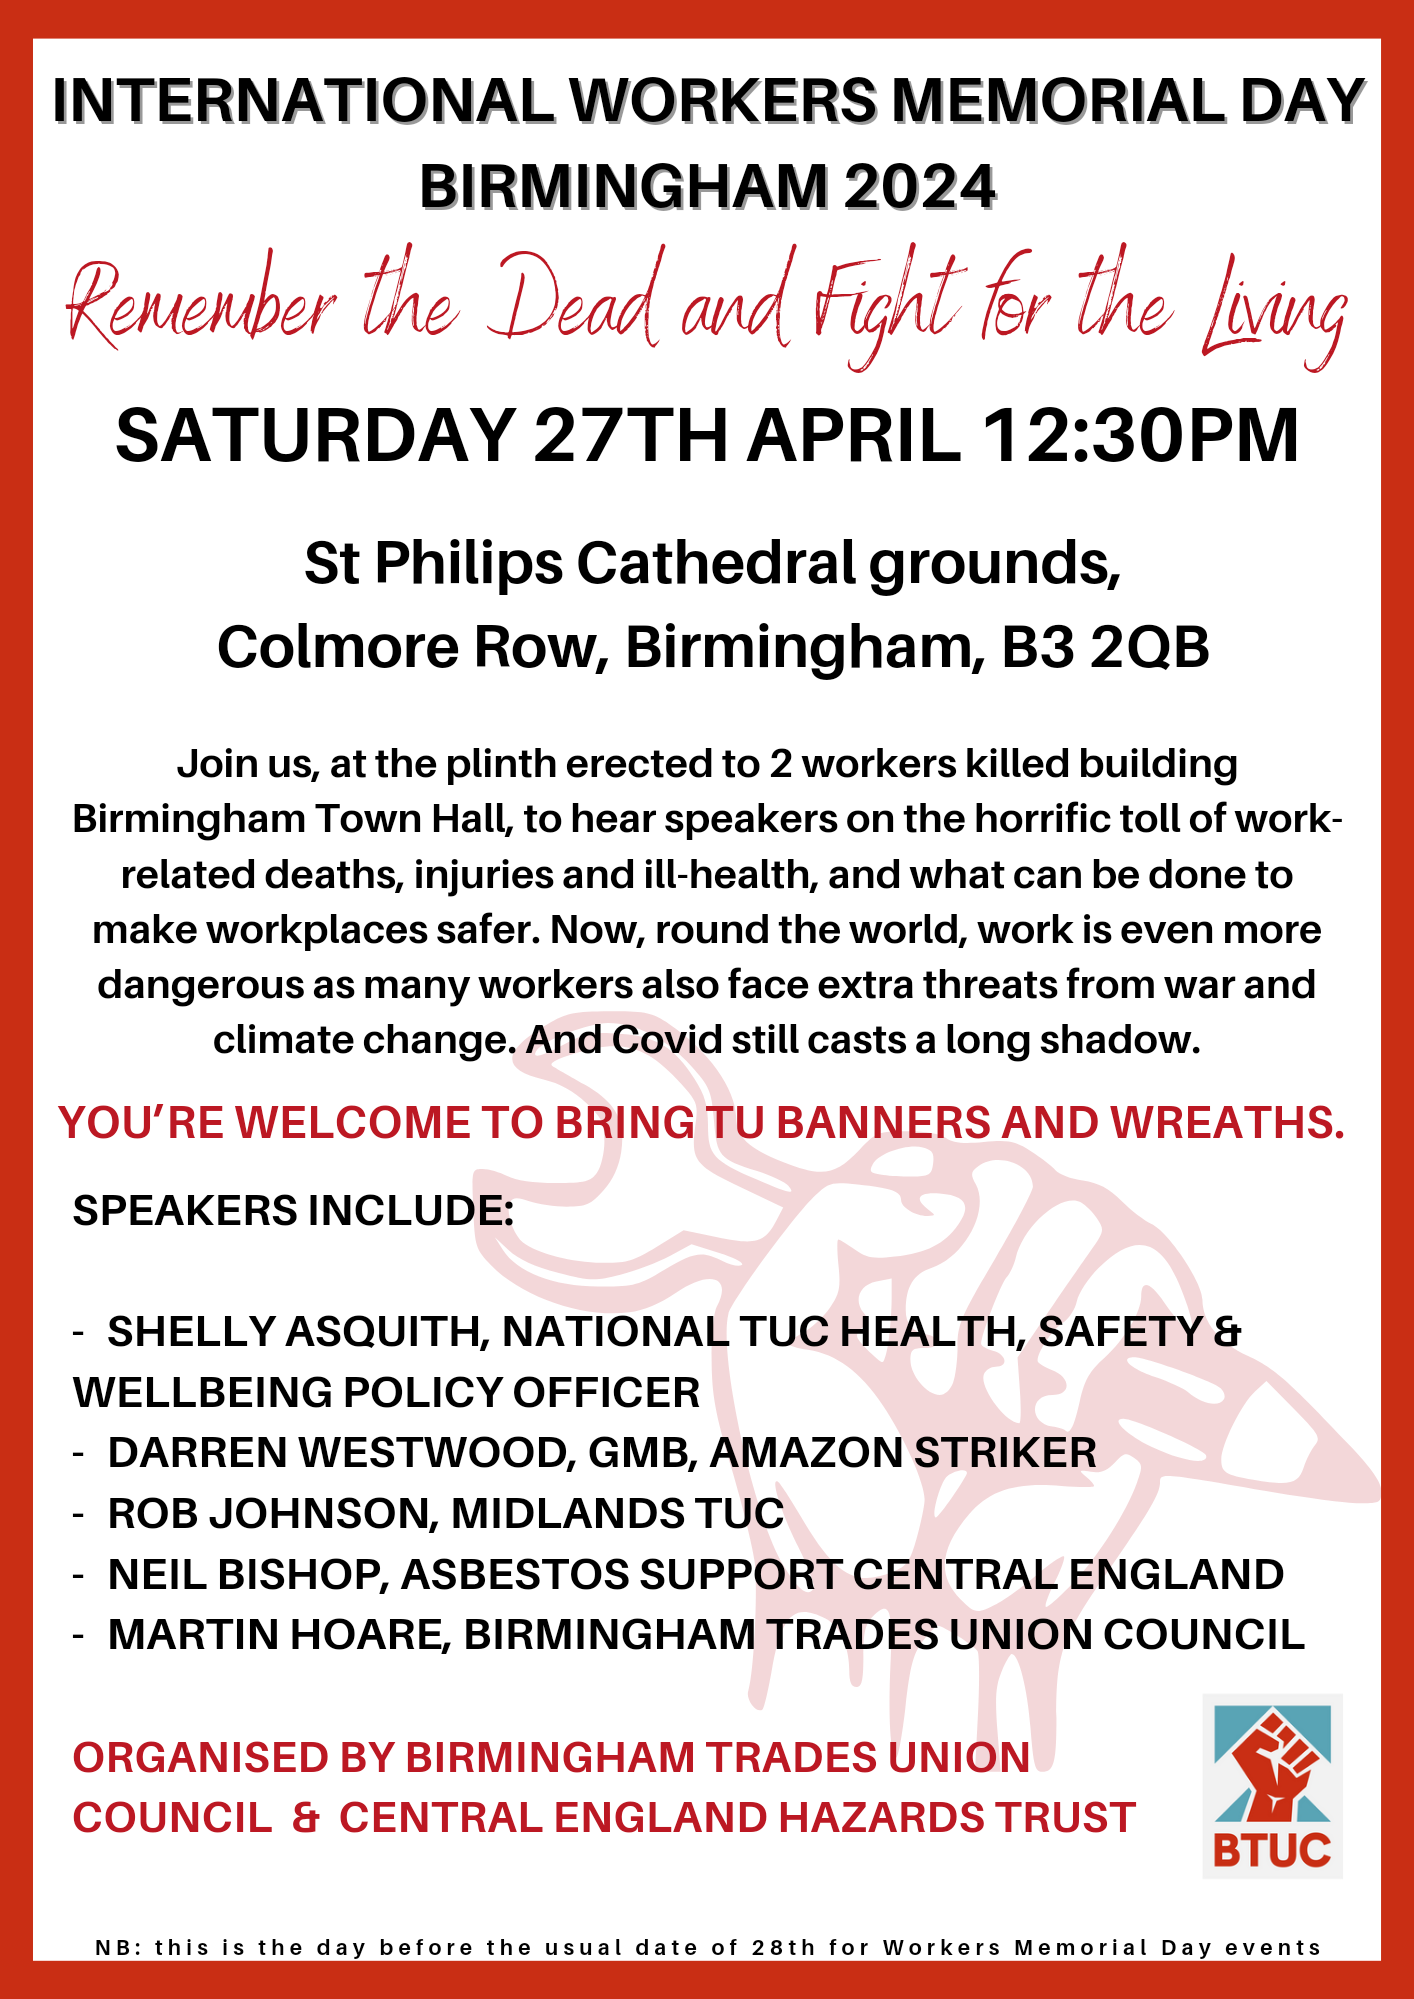 IWMD Poster listing the speakers at the event